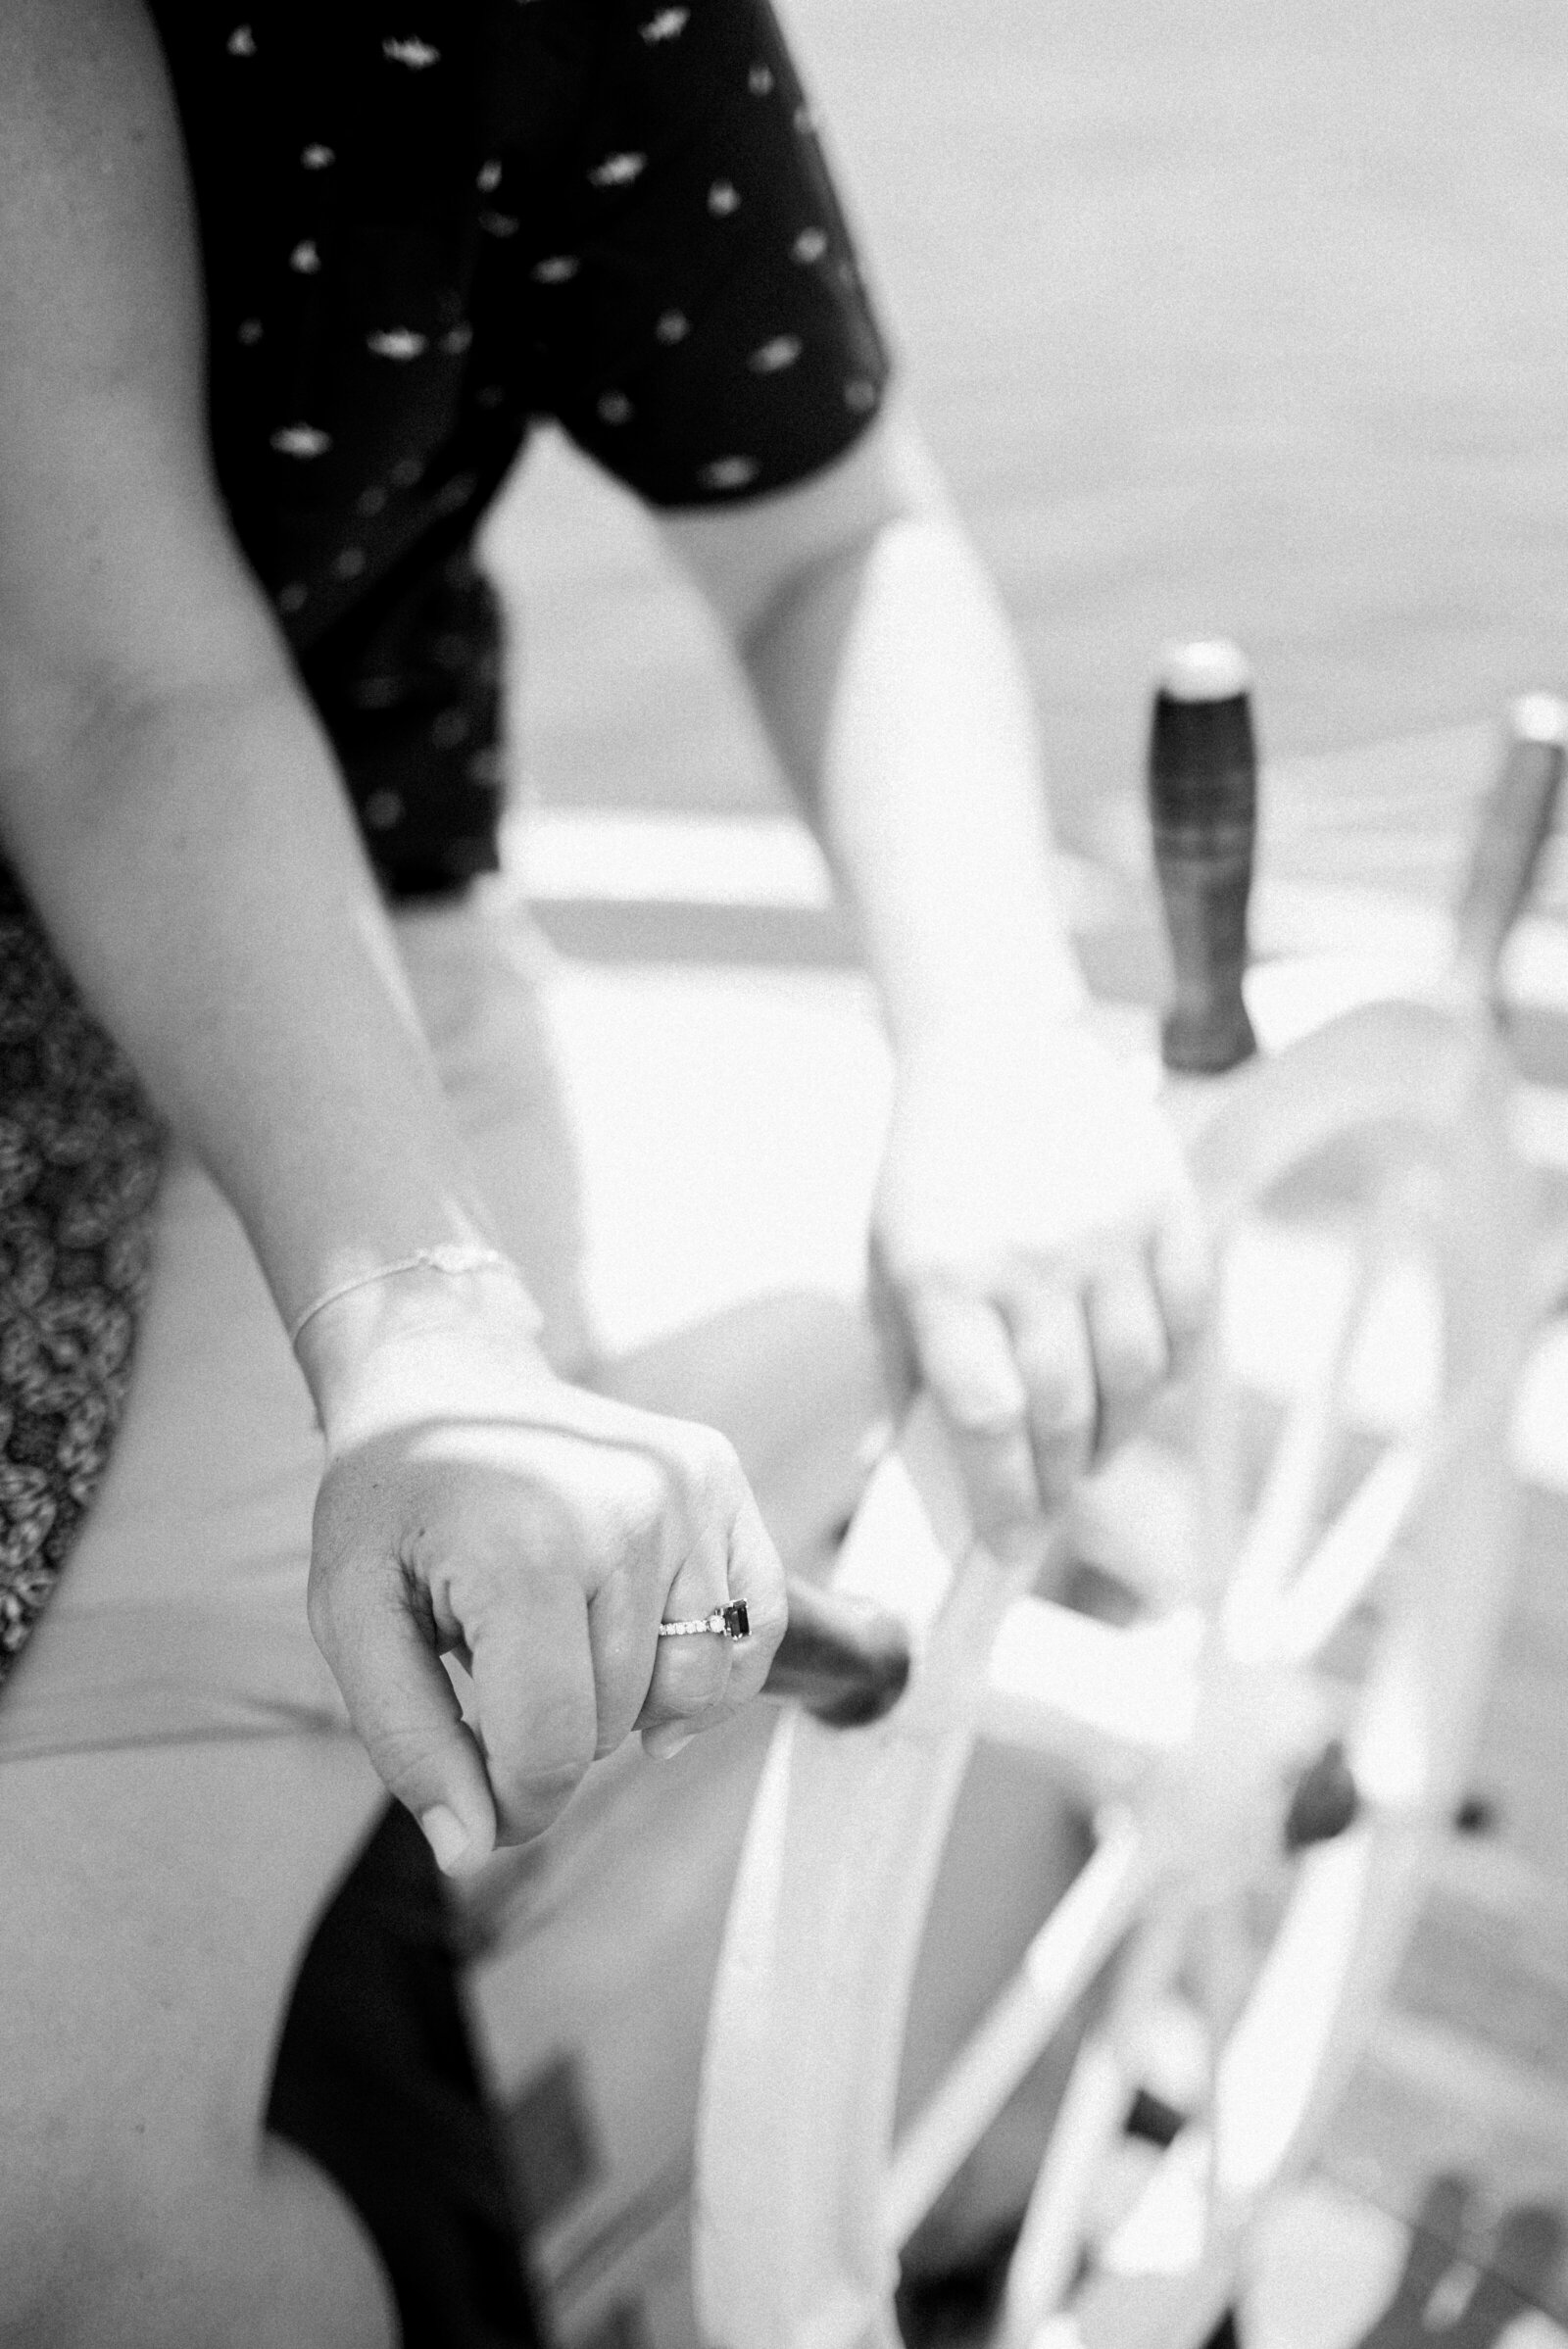 black and white close up photograph of engaged couples hands on the steering helm of a sailboat. Engagement ring is on full display